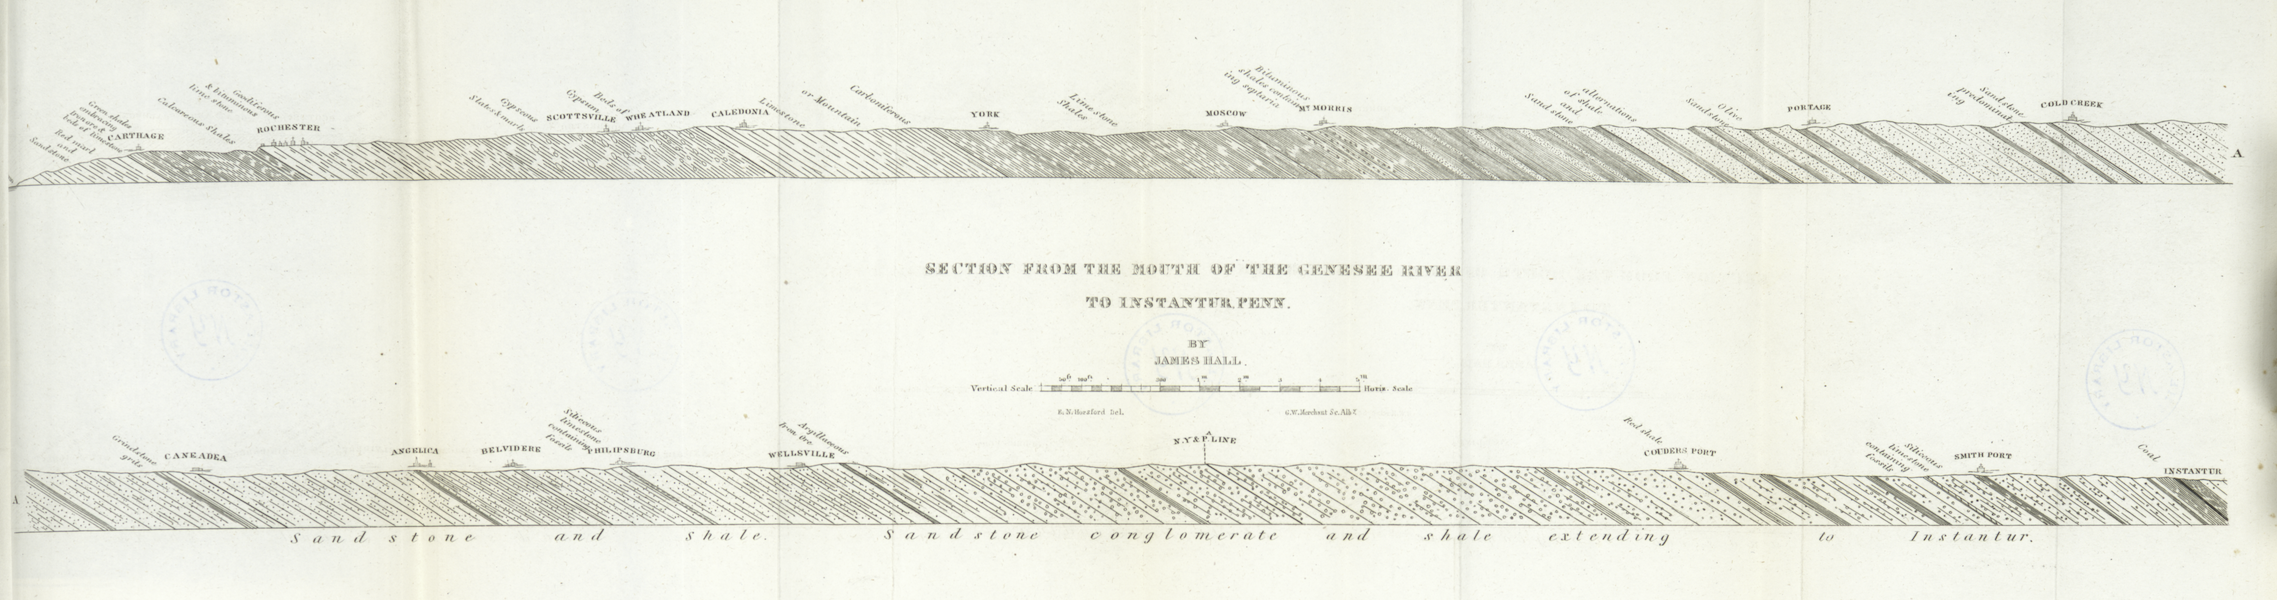 Section from the Mouth of the Genesee River to Instantur, Penn.